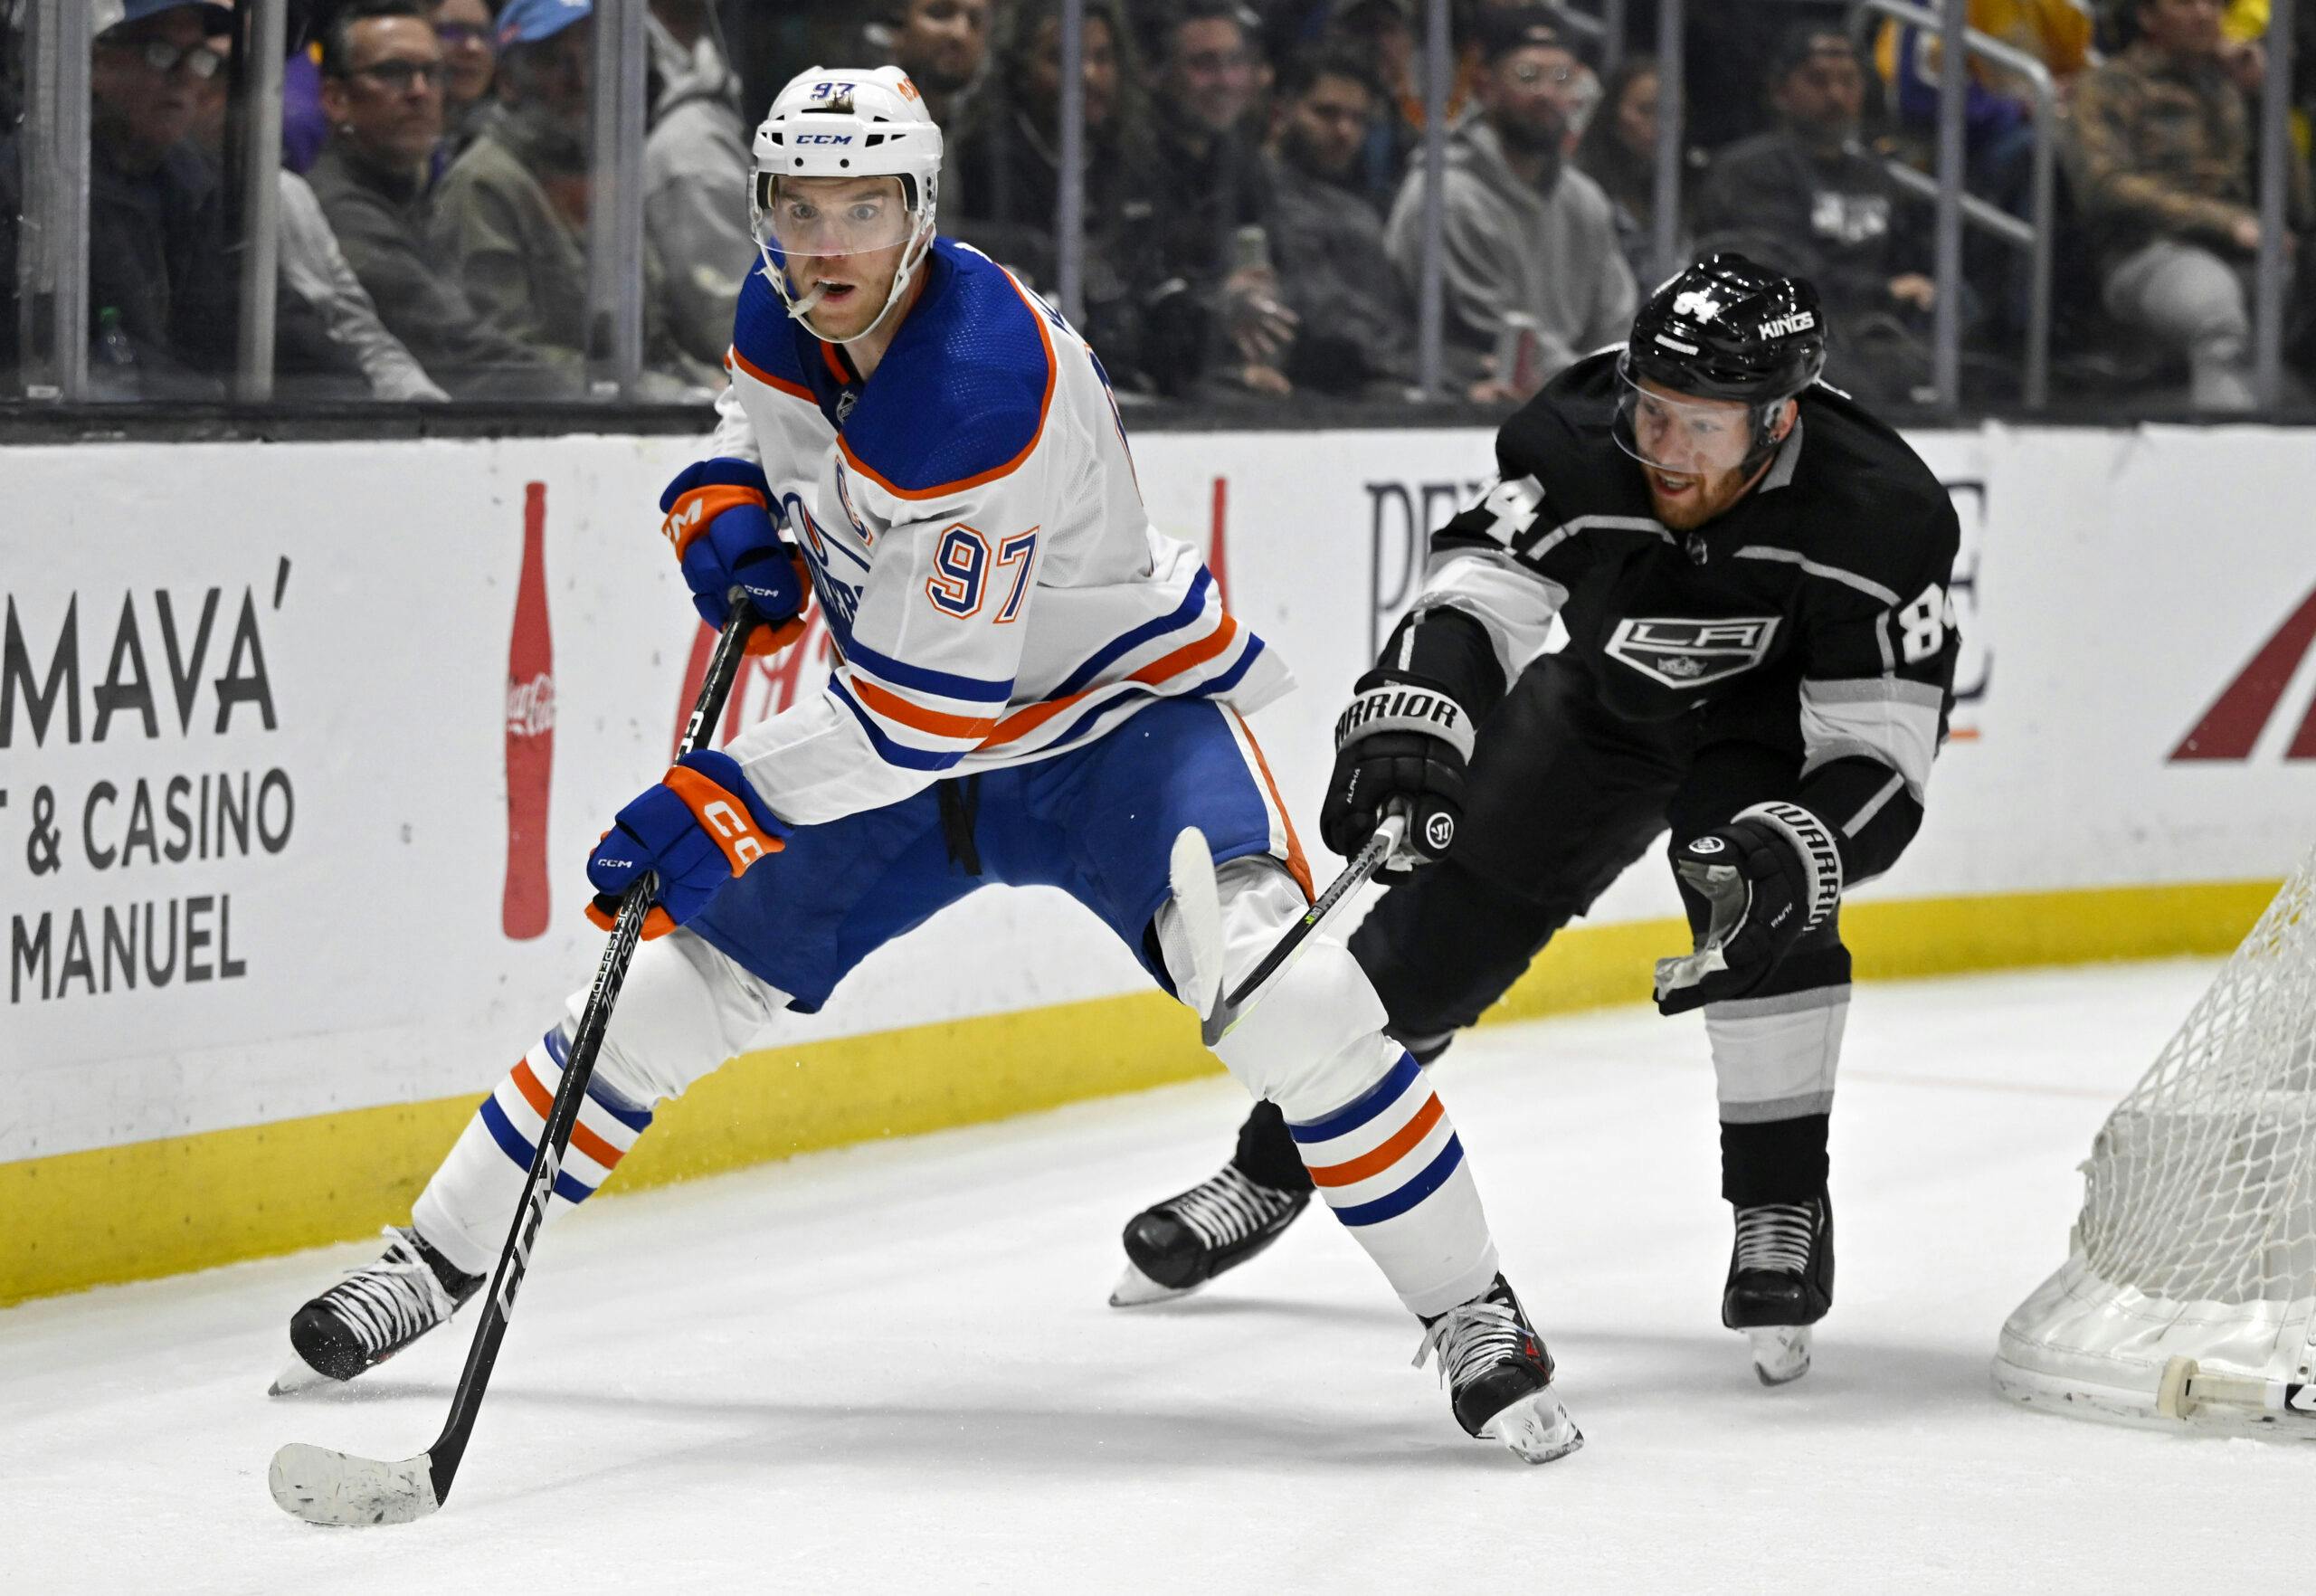 Injured Blake Lizotte out for Kings in Game 3 vs. Oilers - Los Angeles Times